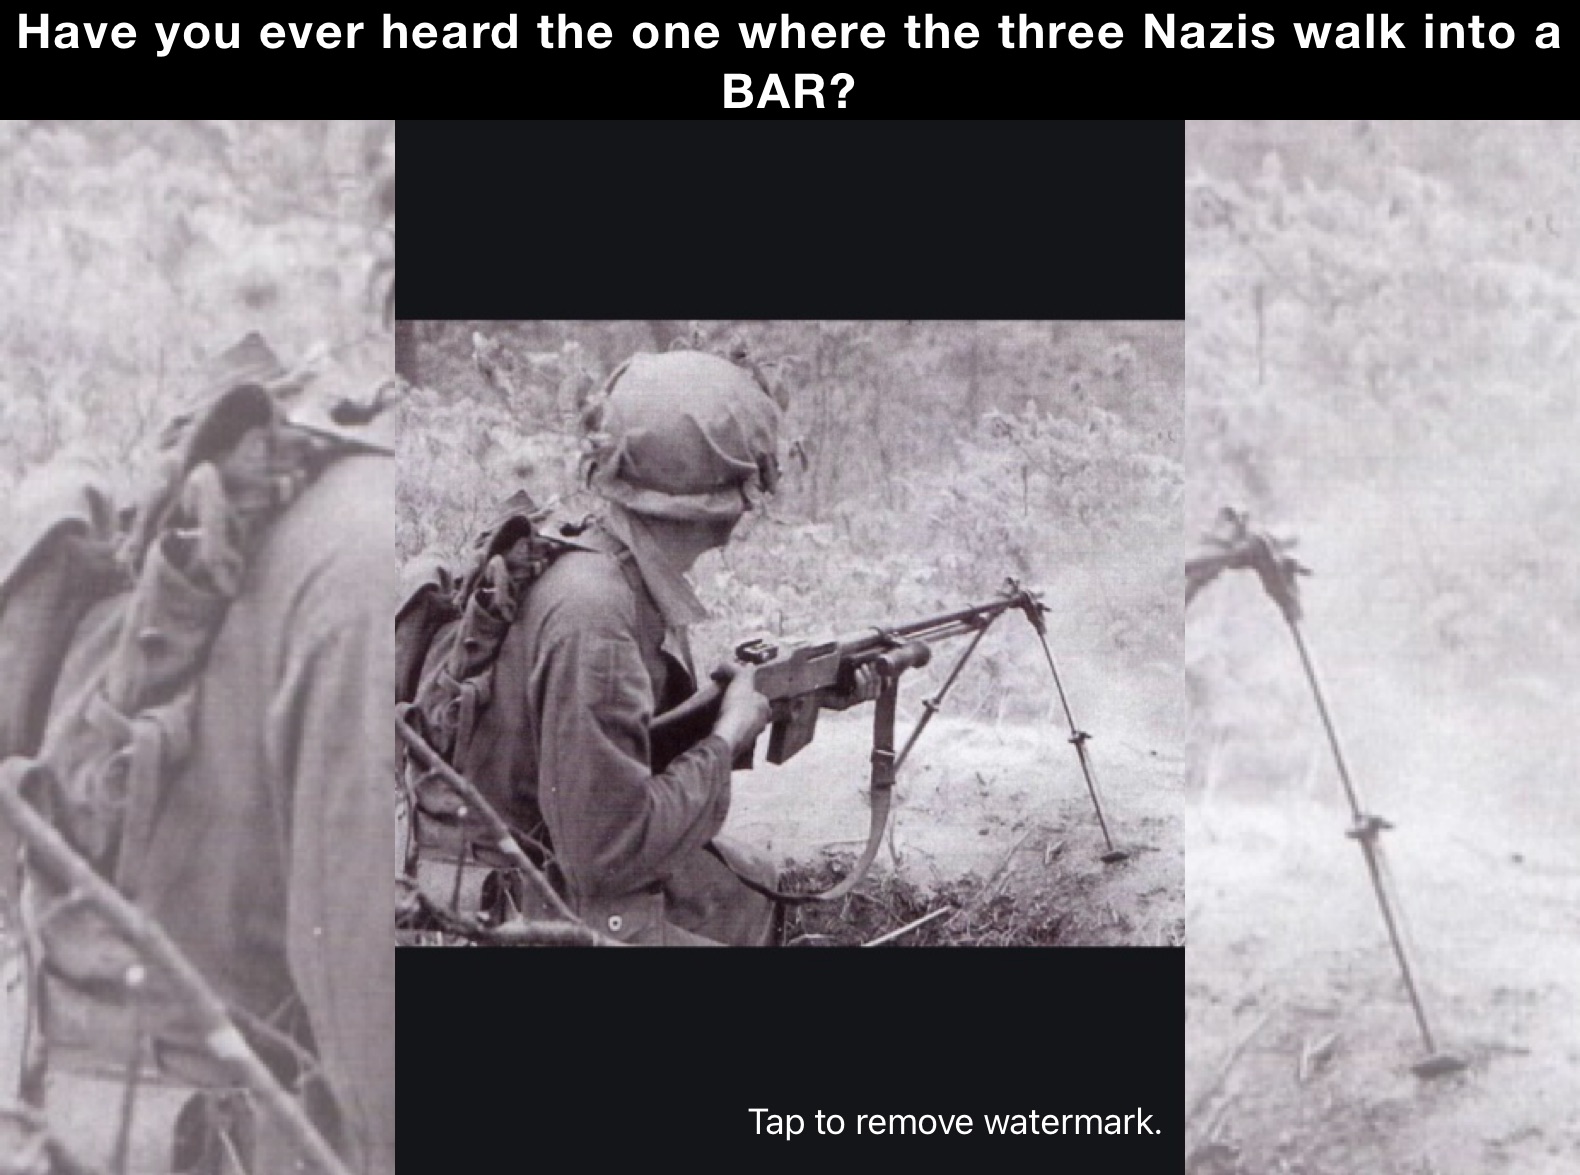 Have you ever heard the one where the three Nazis walk into a BAR?